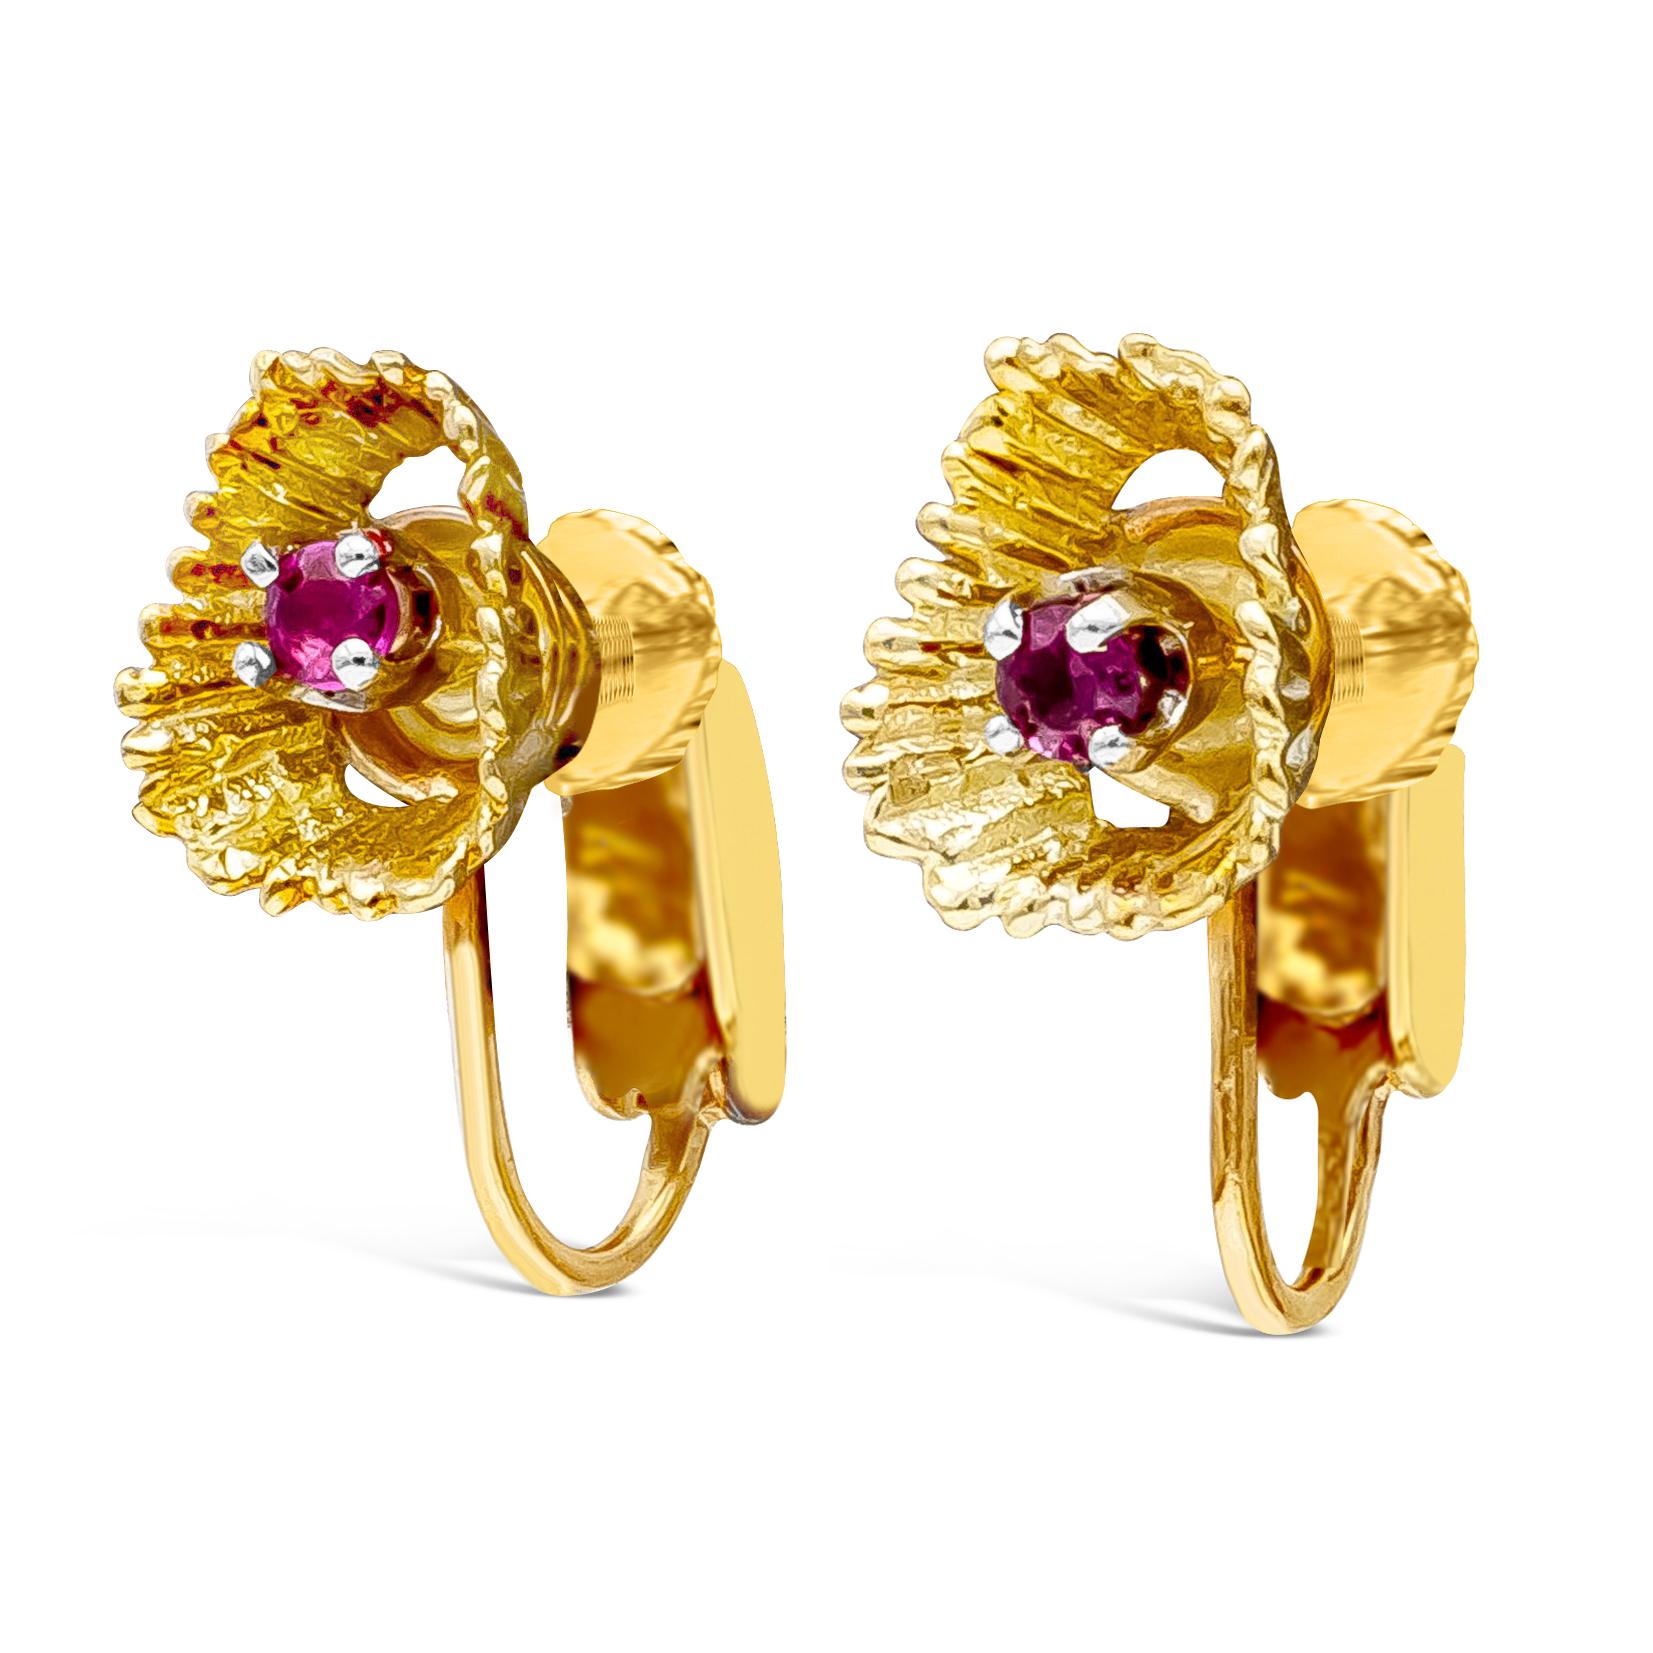 An antique fashion earrings showcasing red ruby gemstones in a coral reef design weighing 0.15 carats total. Screw-back lever clasp design in 14K Yellow Gold. Made with 18K Yellow Gold

Style available in different price ranges. Prices are based on